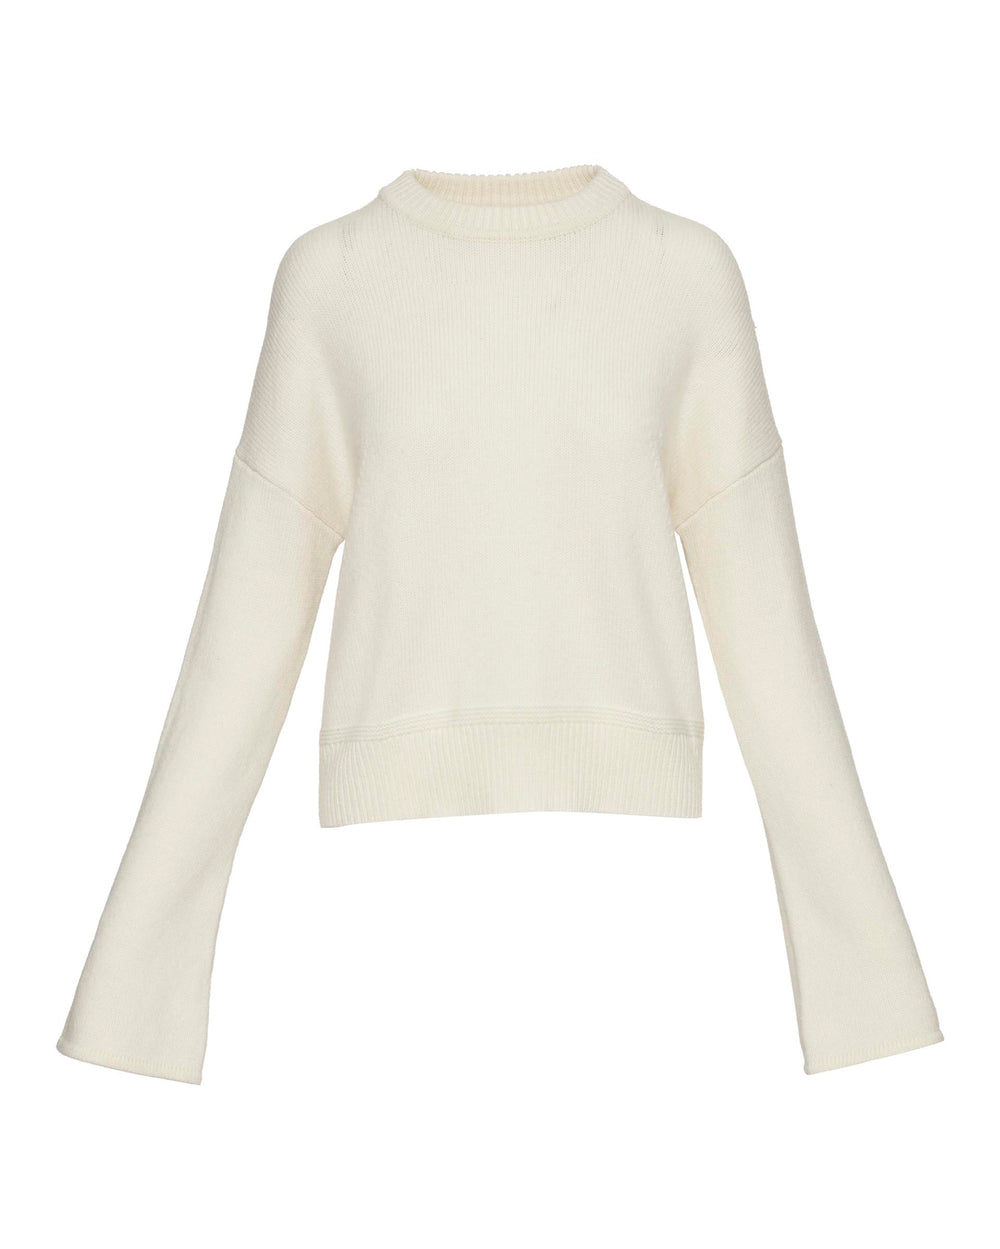 Everyday Boxy Crew in Wool-Cashmere | Women's Sweaters | Argent